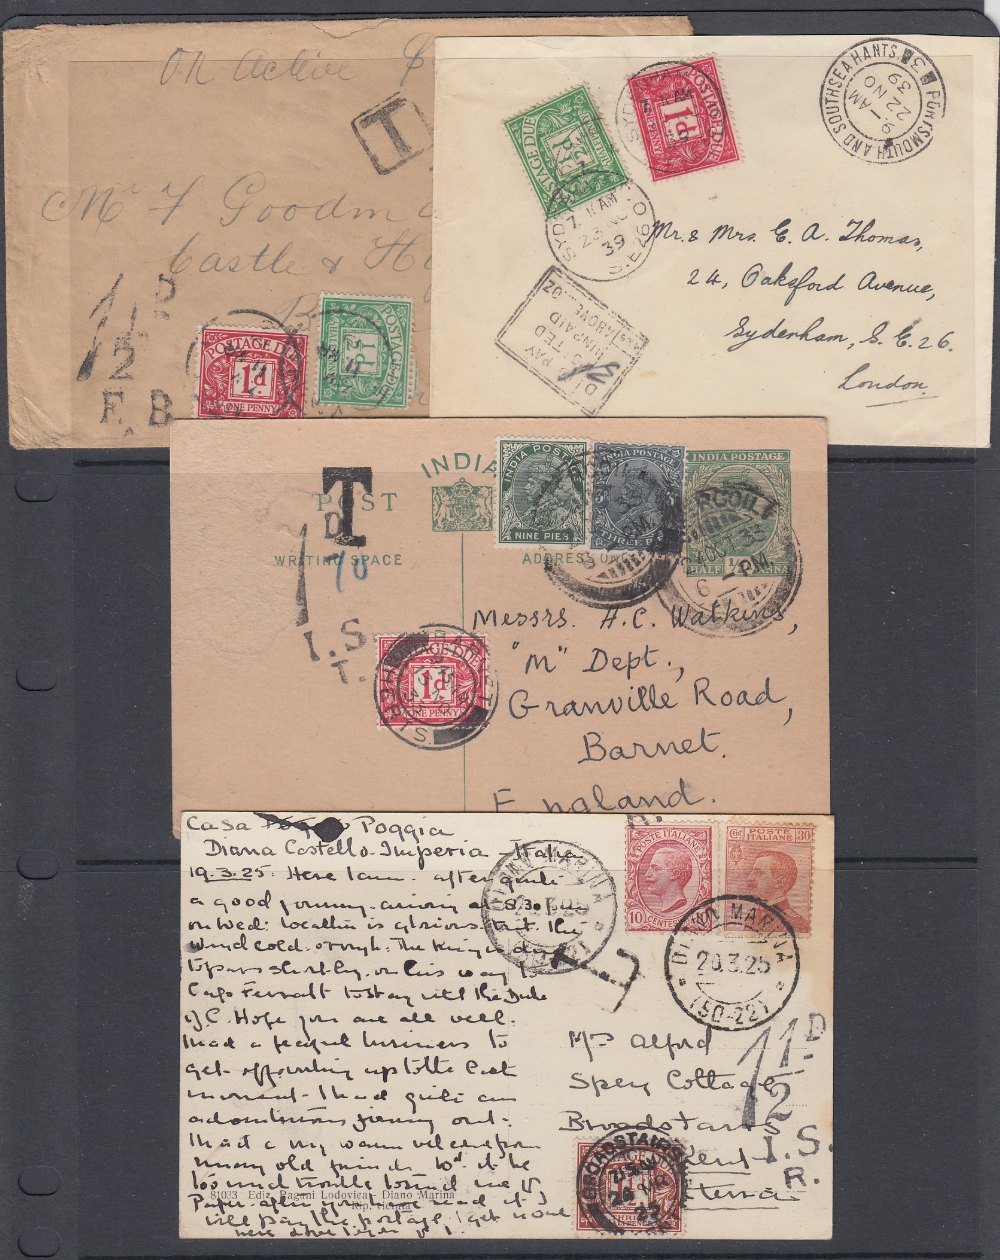 GREAT BRITIAN STAMPS : POSTAGE DUES, selection of 18 covers 1917-53, various instructional markings. - Image 6 of 6